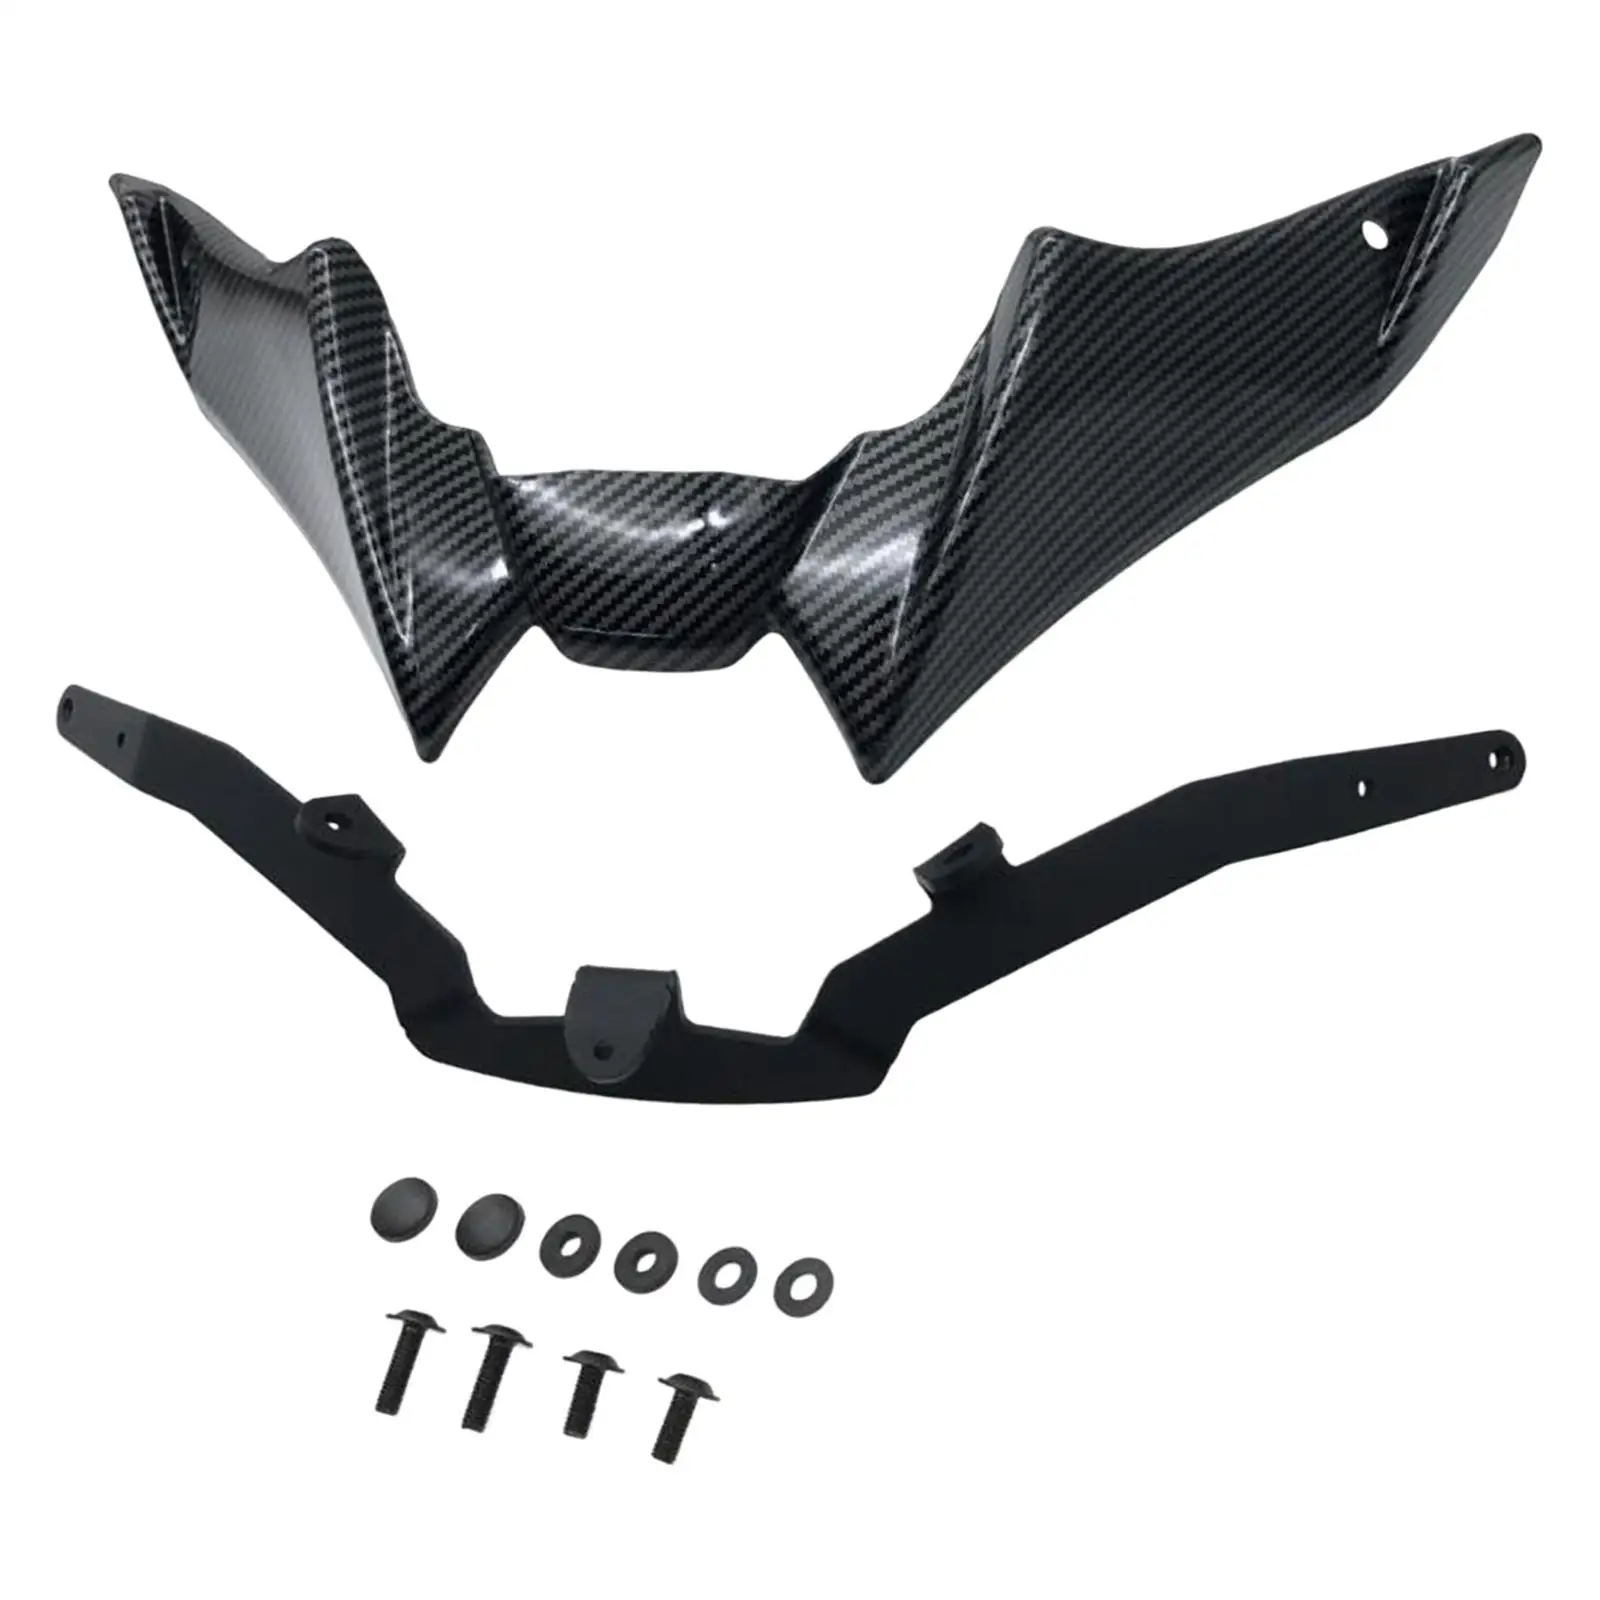 Front Headlight Bracket Replaces Upper Fairing Stay Bracket Front Nose Spoiler Wing Fairing Cowling for MT-09 V3